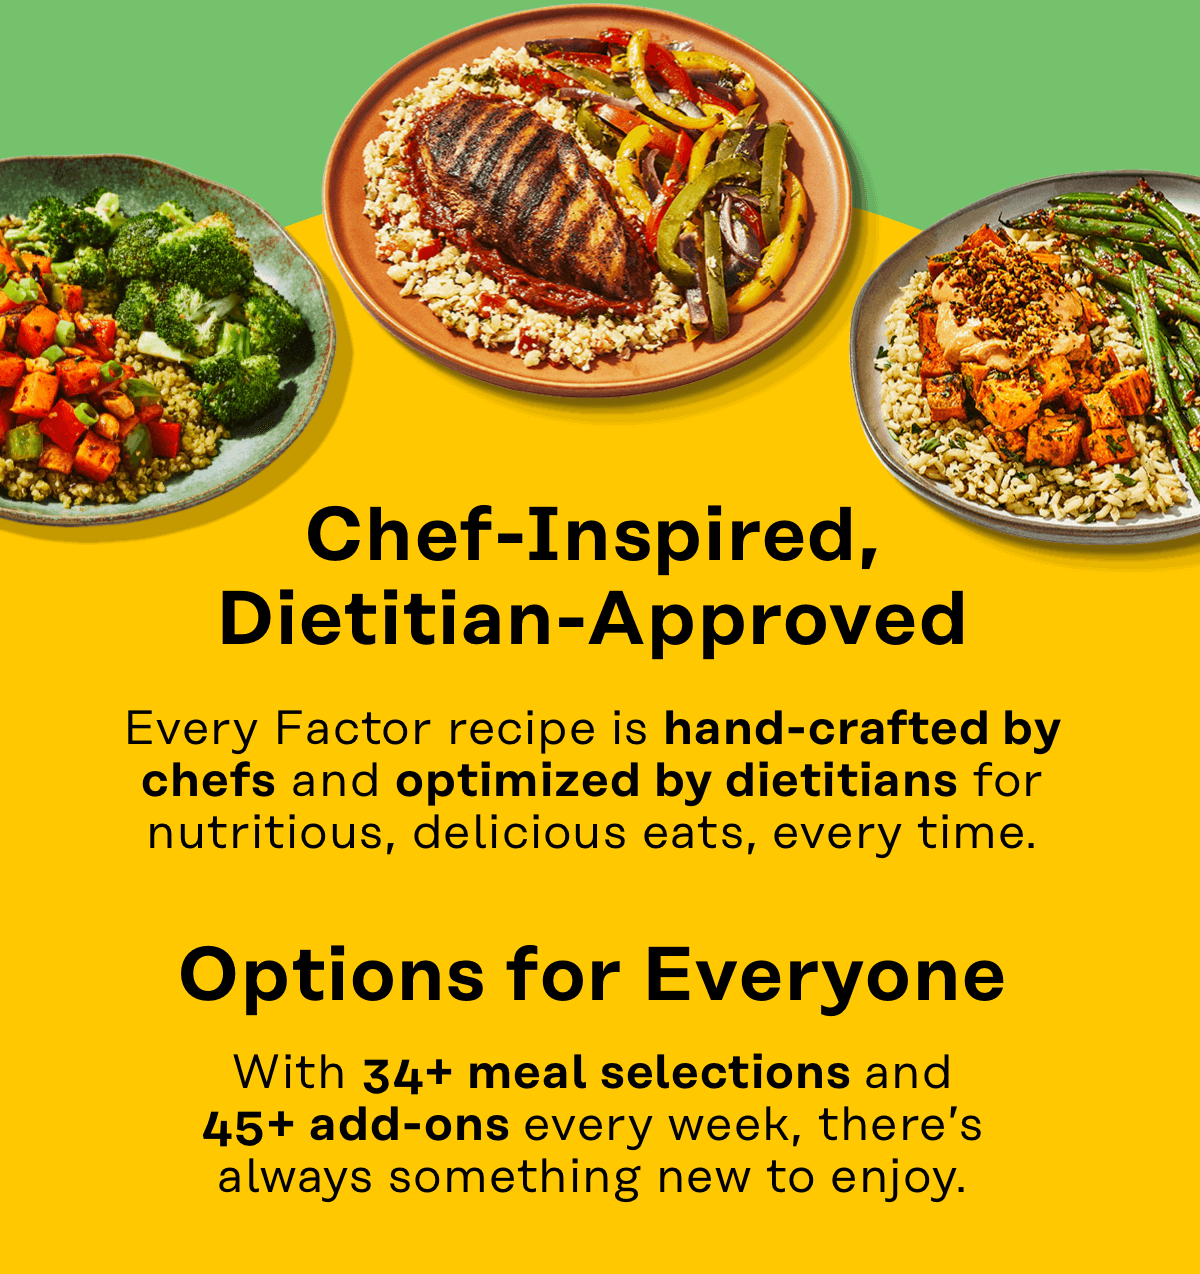 Chef-inspired, dietitian-approved options for everyone